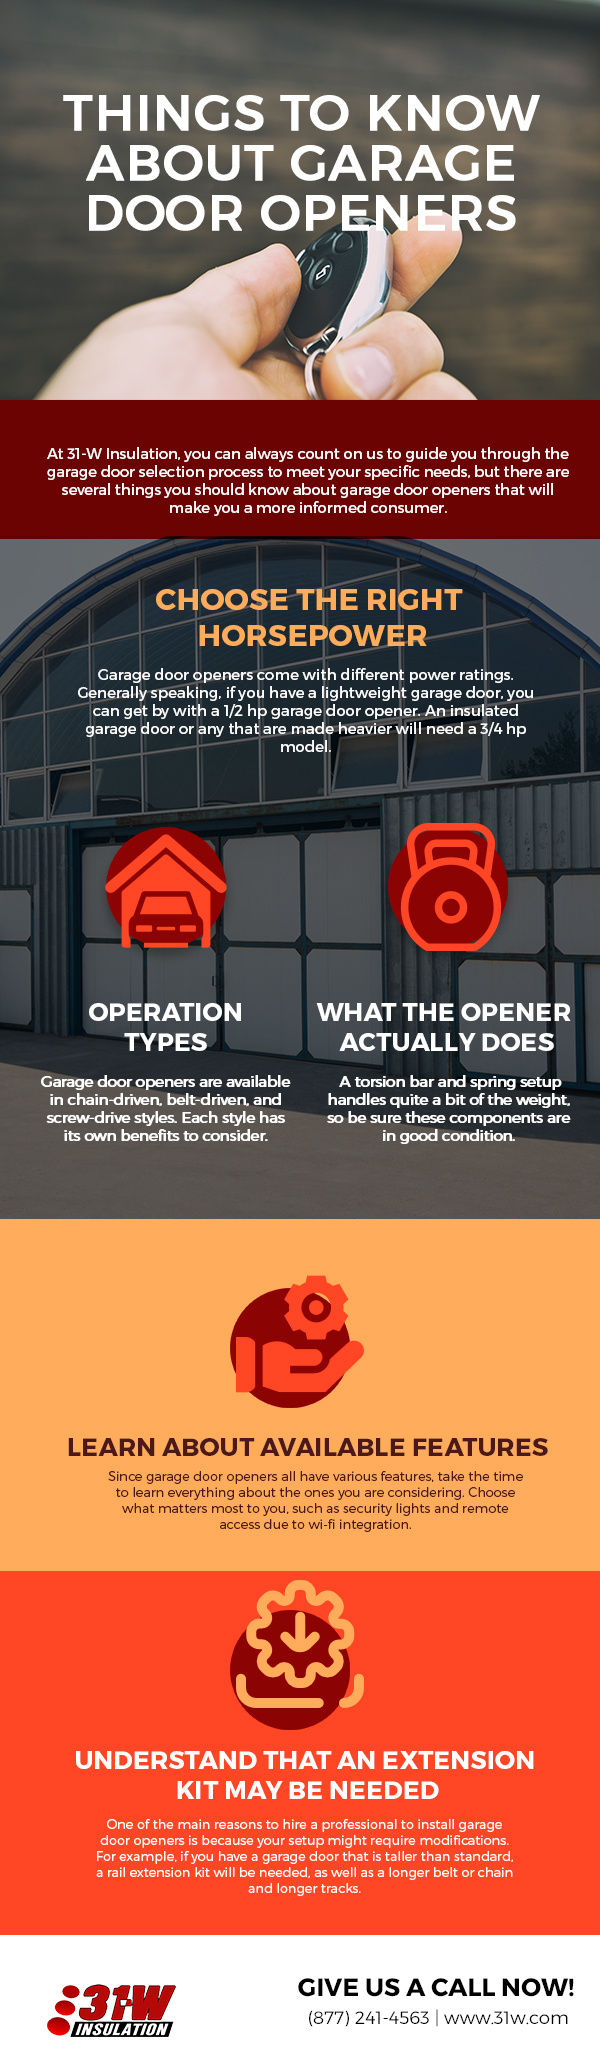 Things to Know About Garage Door Openers [infographic]